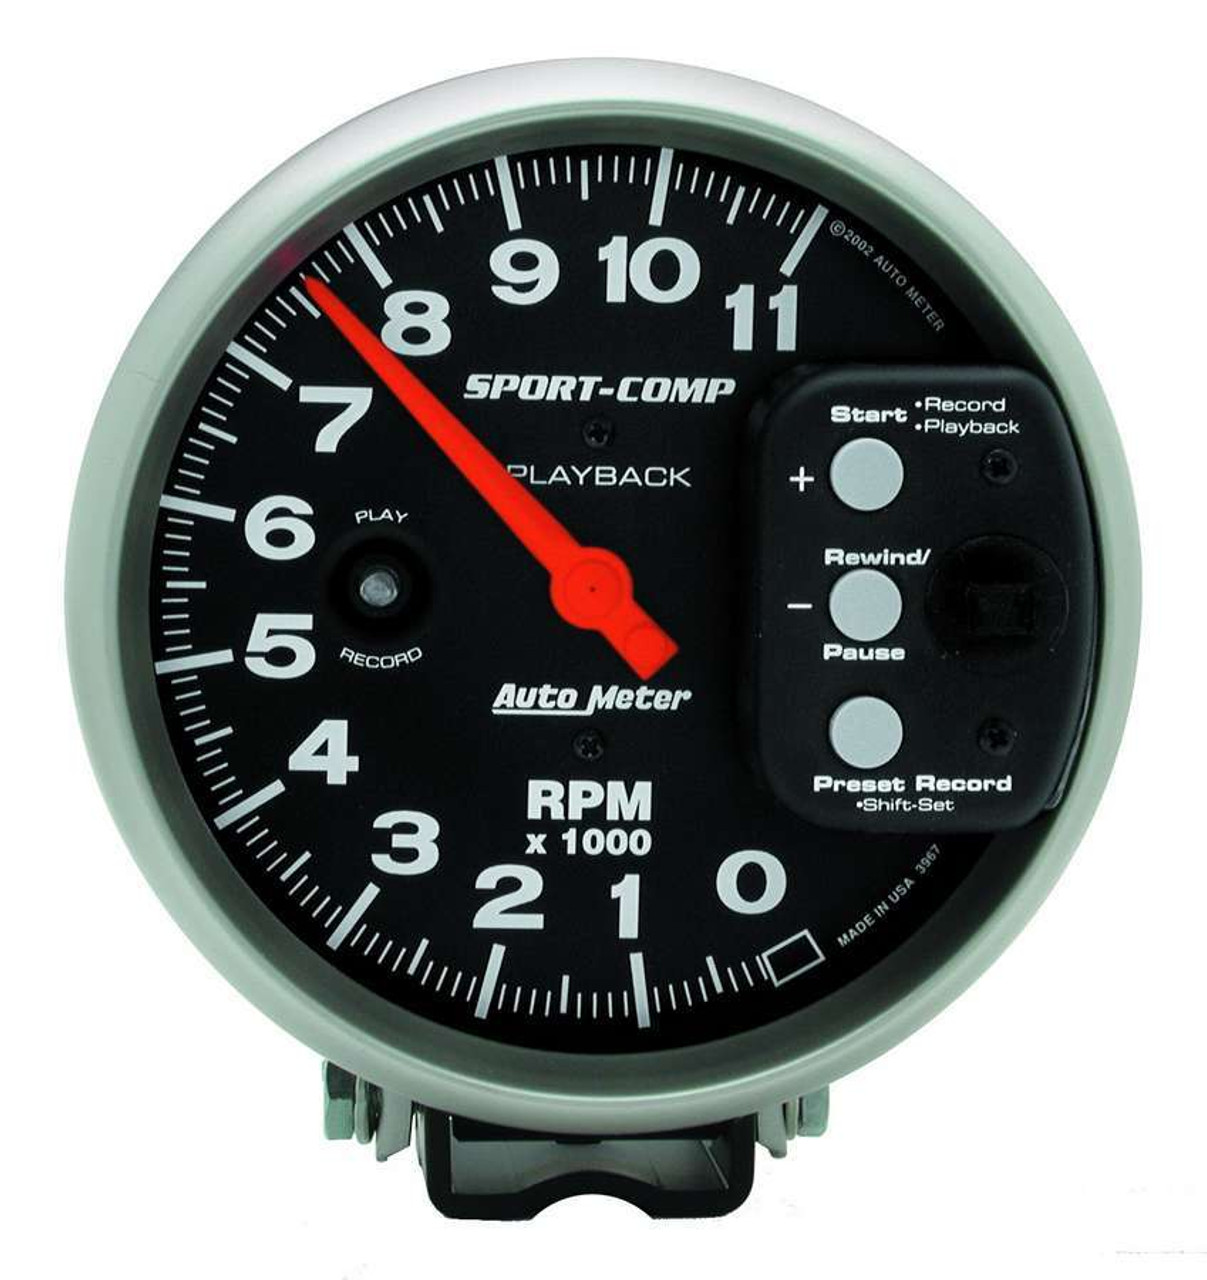 Autometer Sport-Comp Tachometer 5in 11K RPM Pedestal with RPM playback - 3967